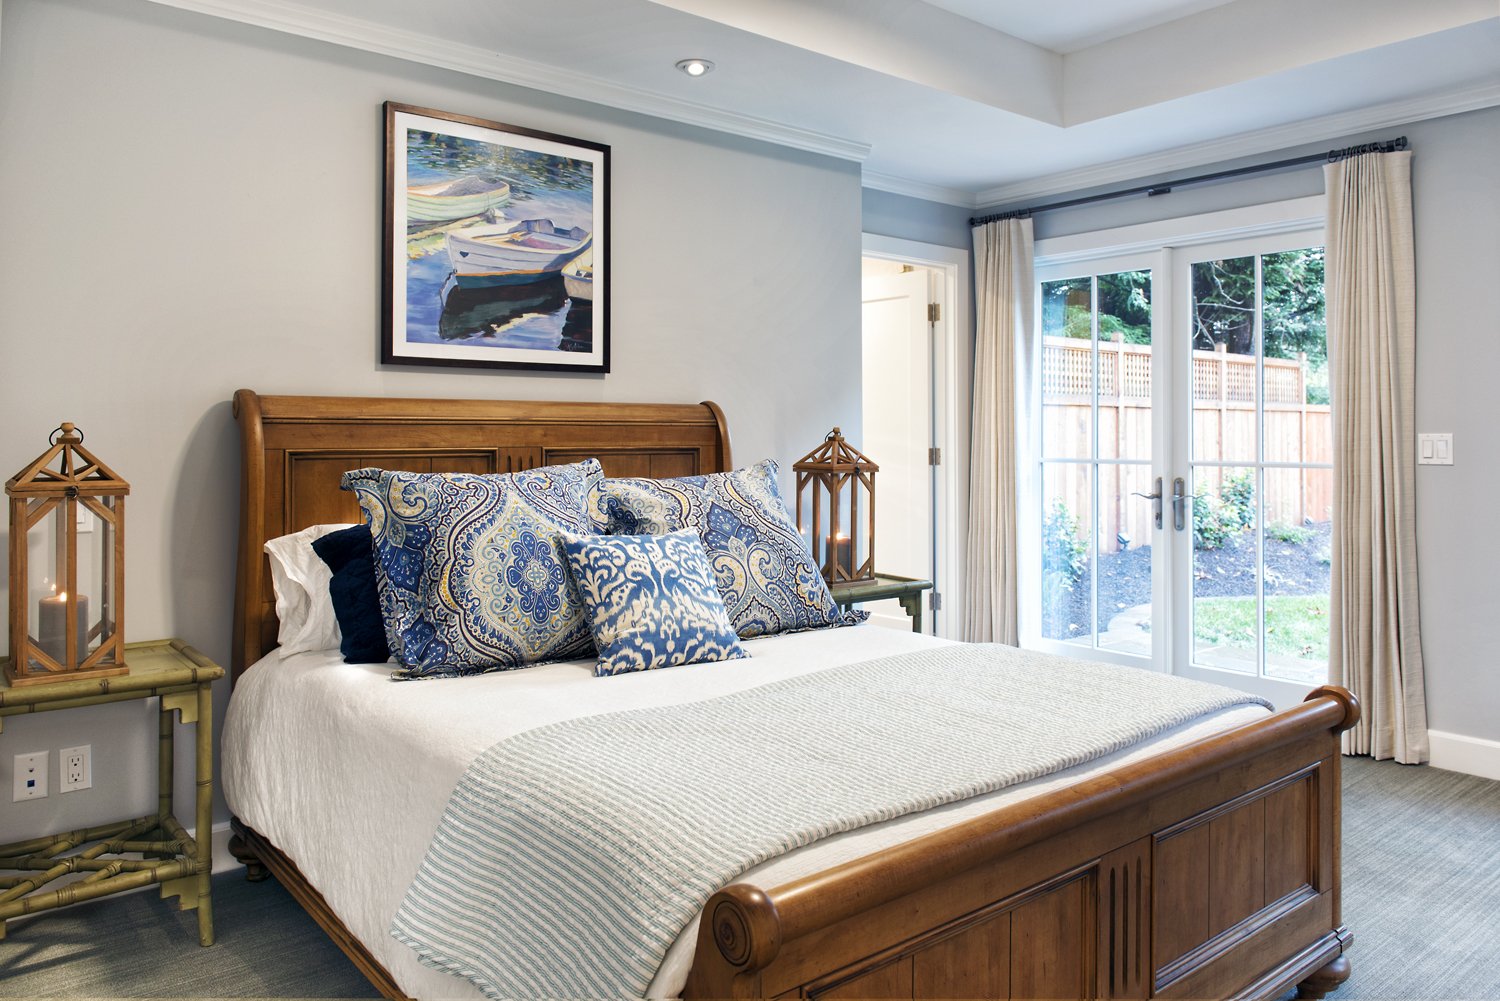  A bedroom with a wooden bed frame, painting of boats, and double doors to the yard.  